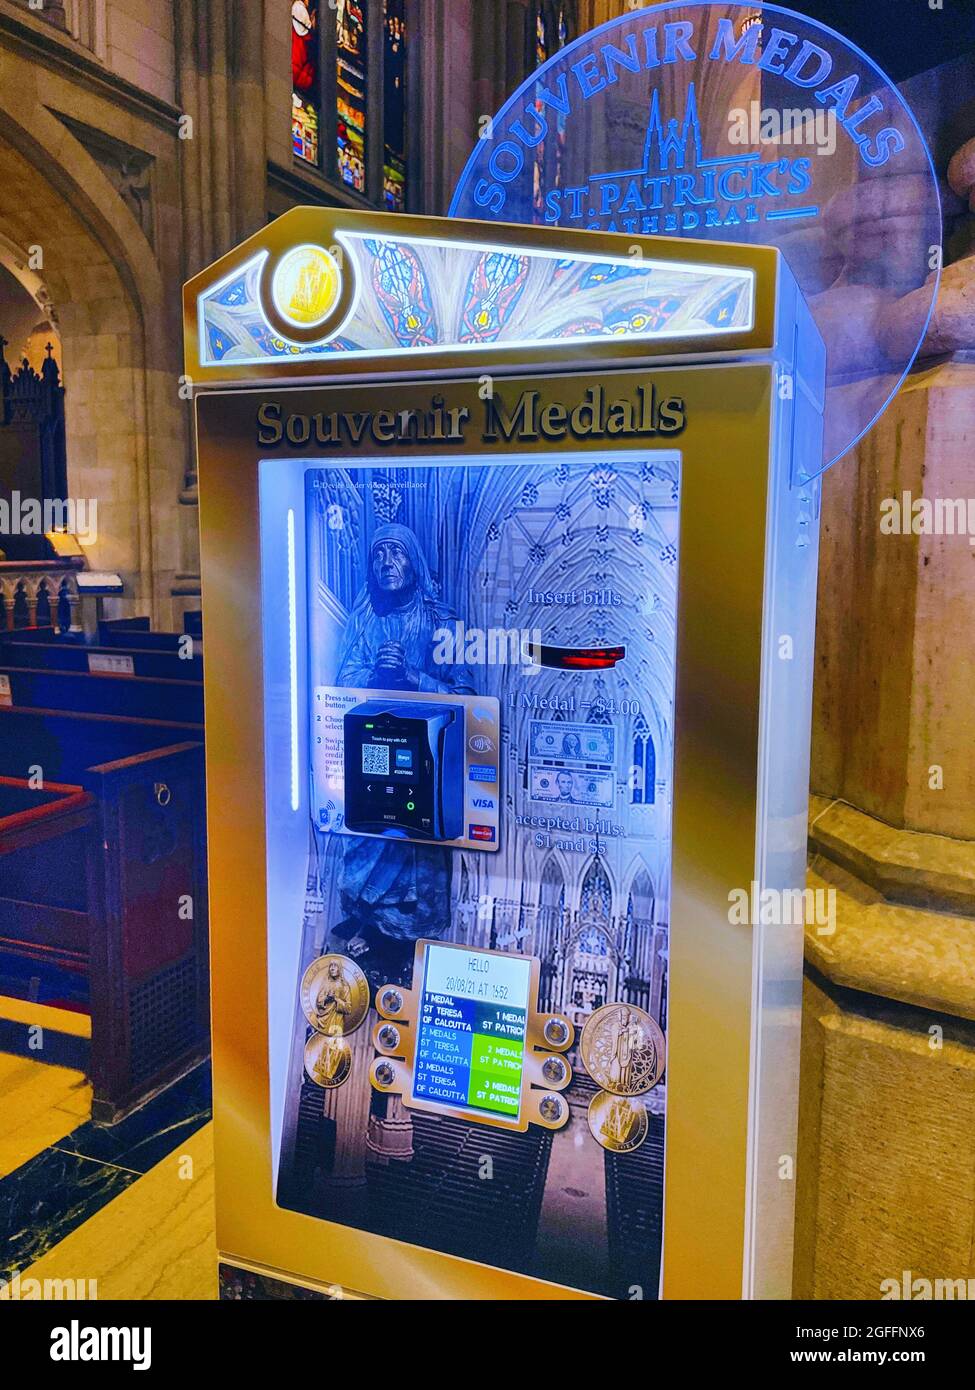 Interior, Cathedral of St. Patrick,Religious Medal Vending Machine Fifth Avenue, NYC Stock Photo